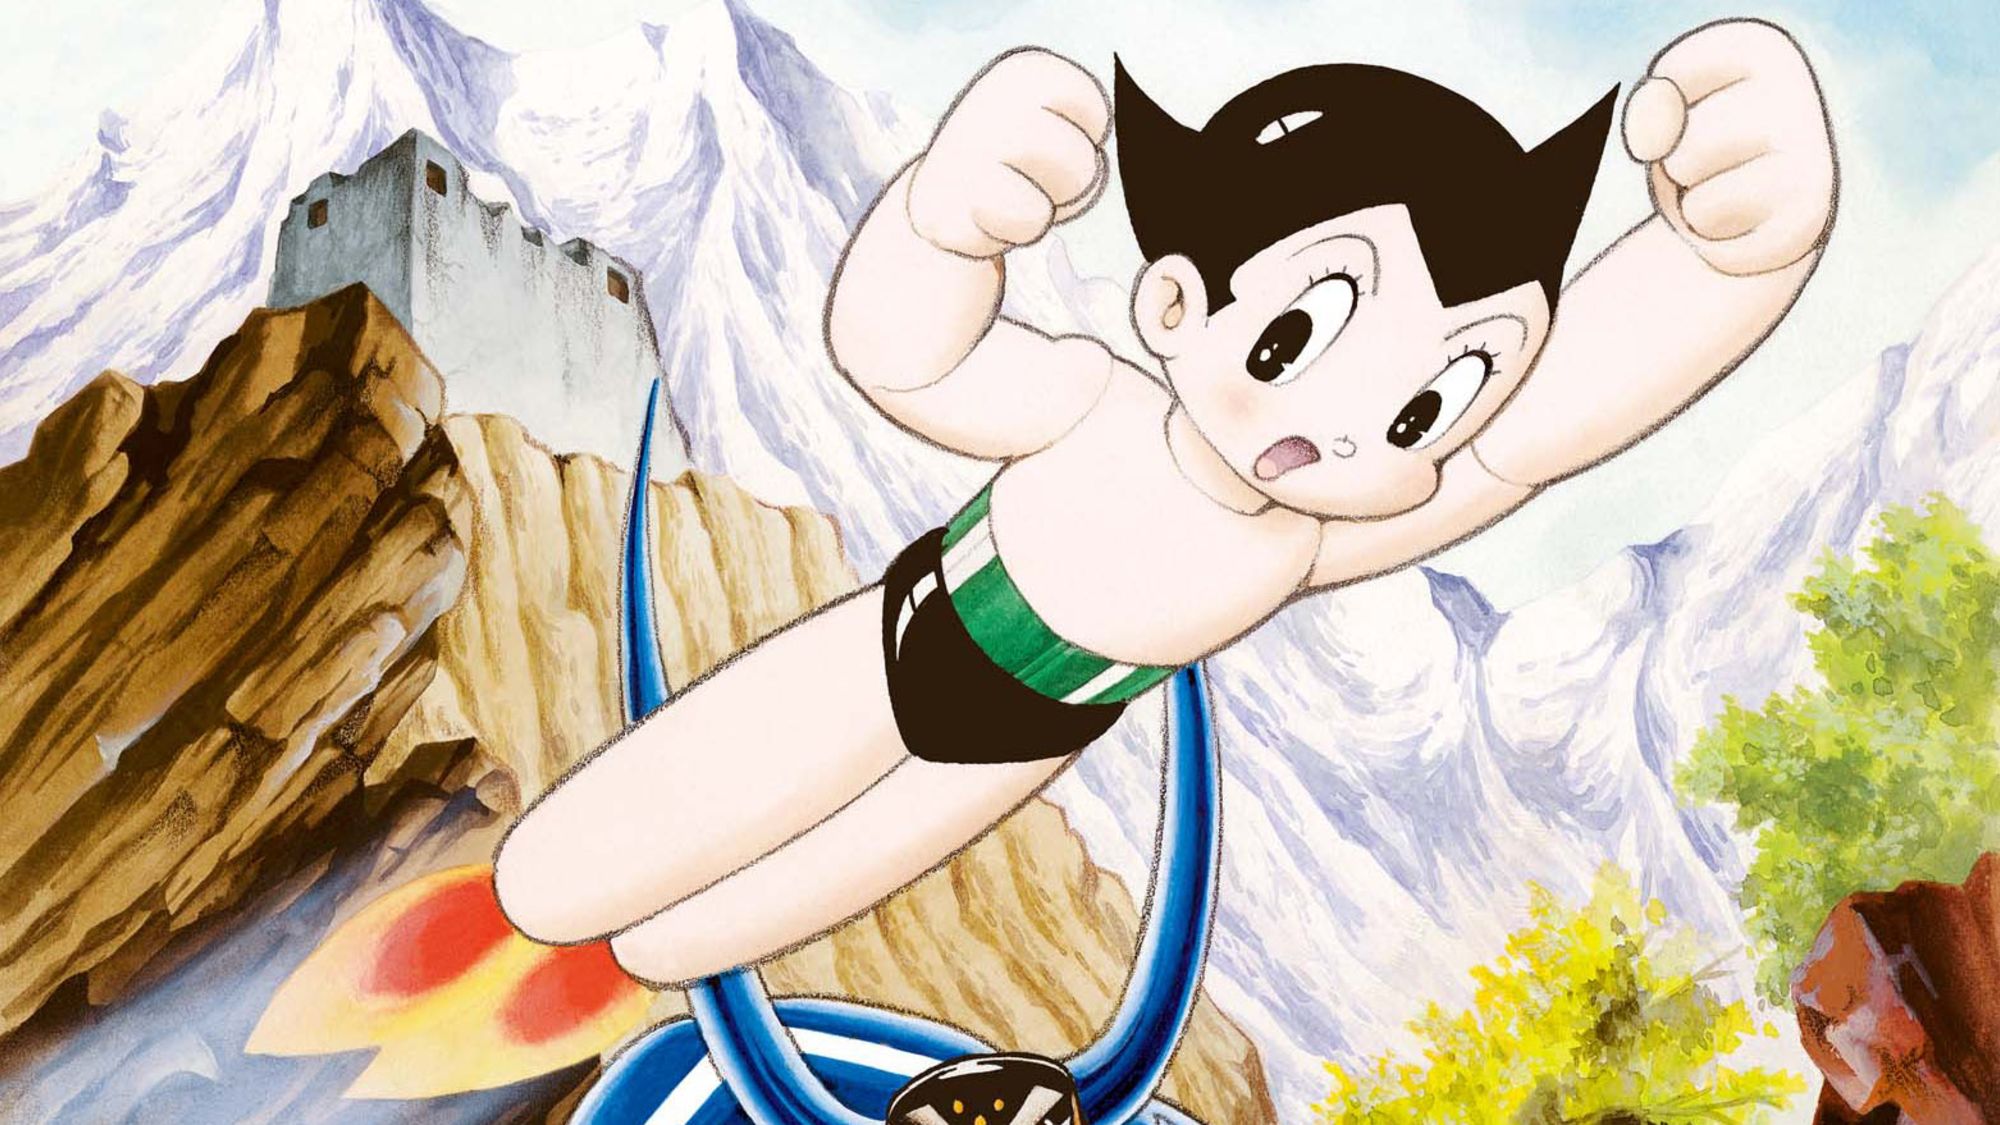 Tokyo: Emon Animates Chinese Comics for Japan and the World